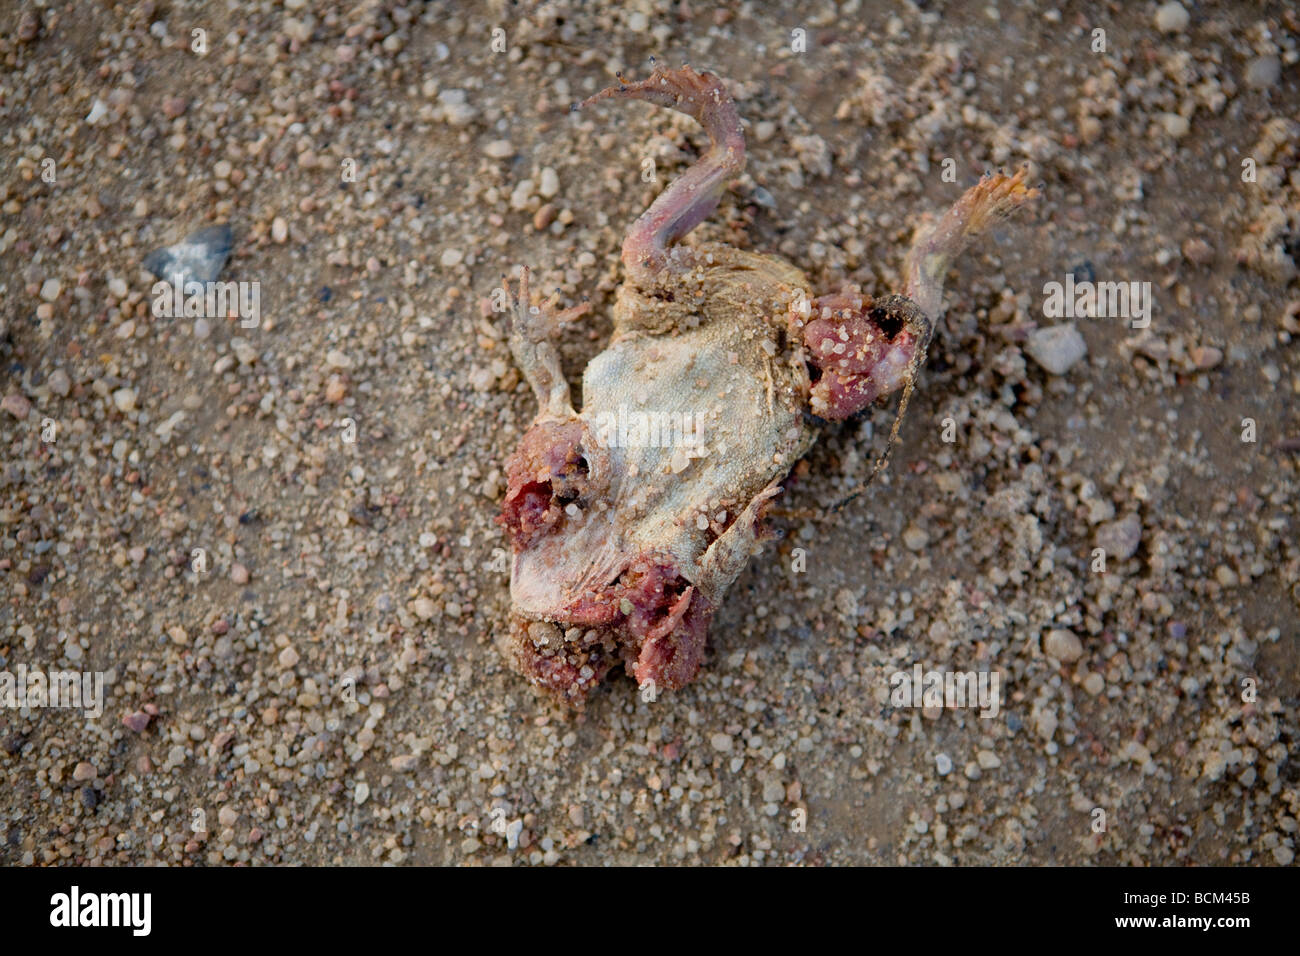 Dead toad laying on a gravel road Stock Photo